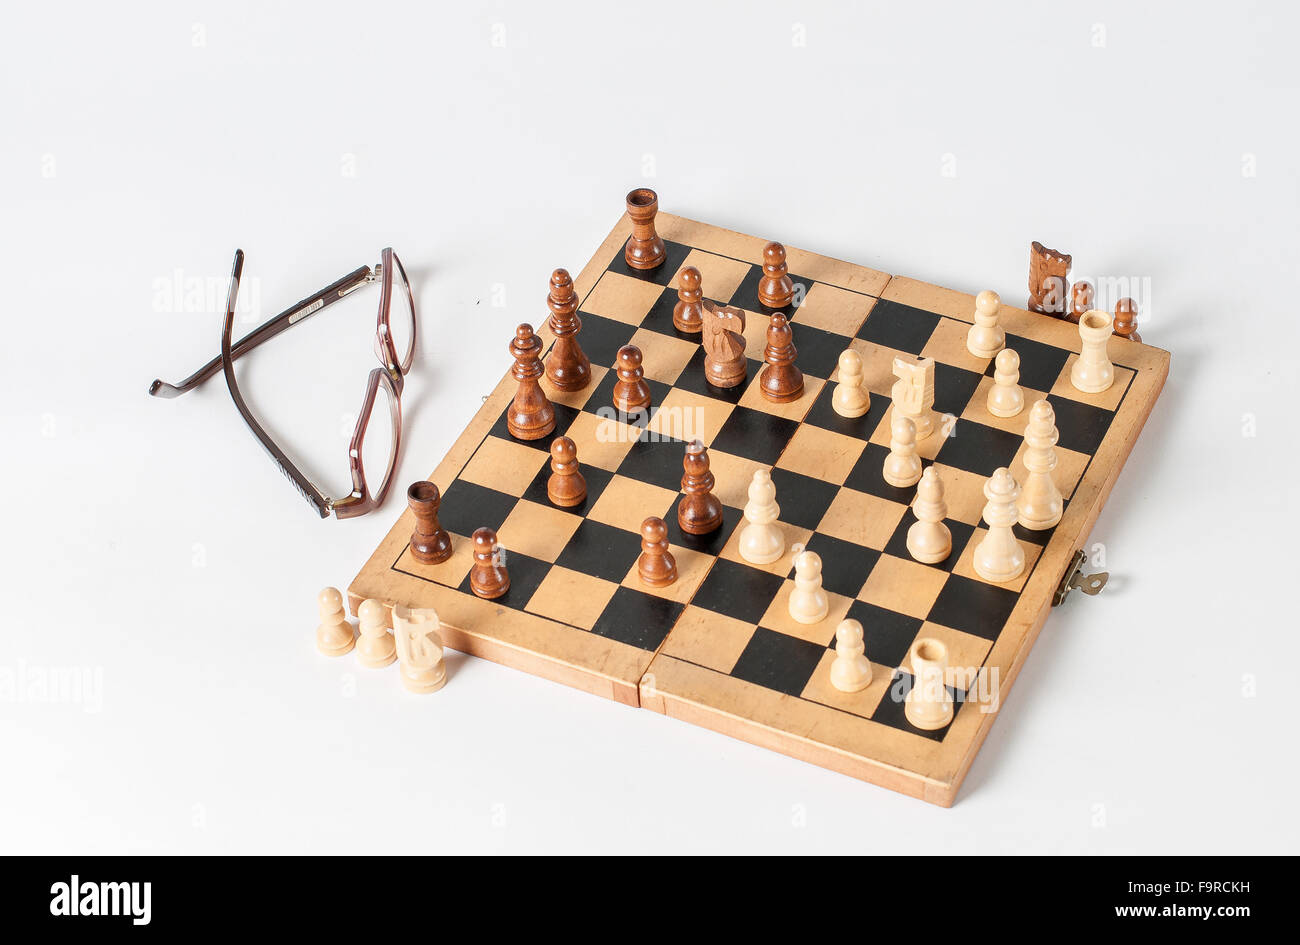 the chess game board is photographed on a white base Stock Photo